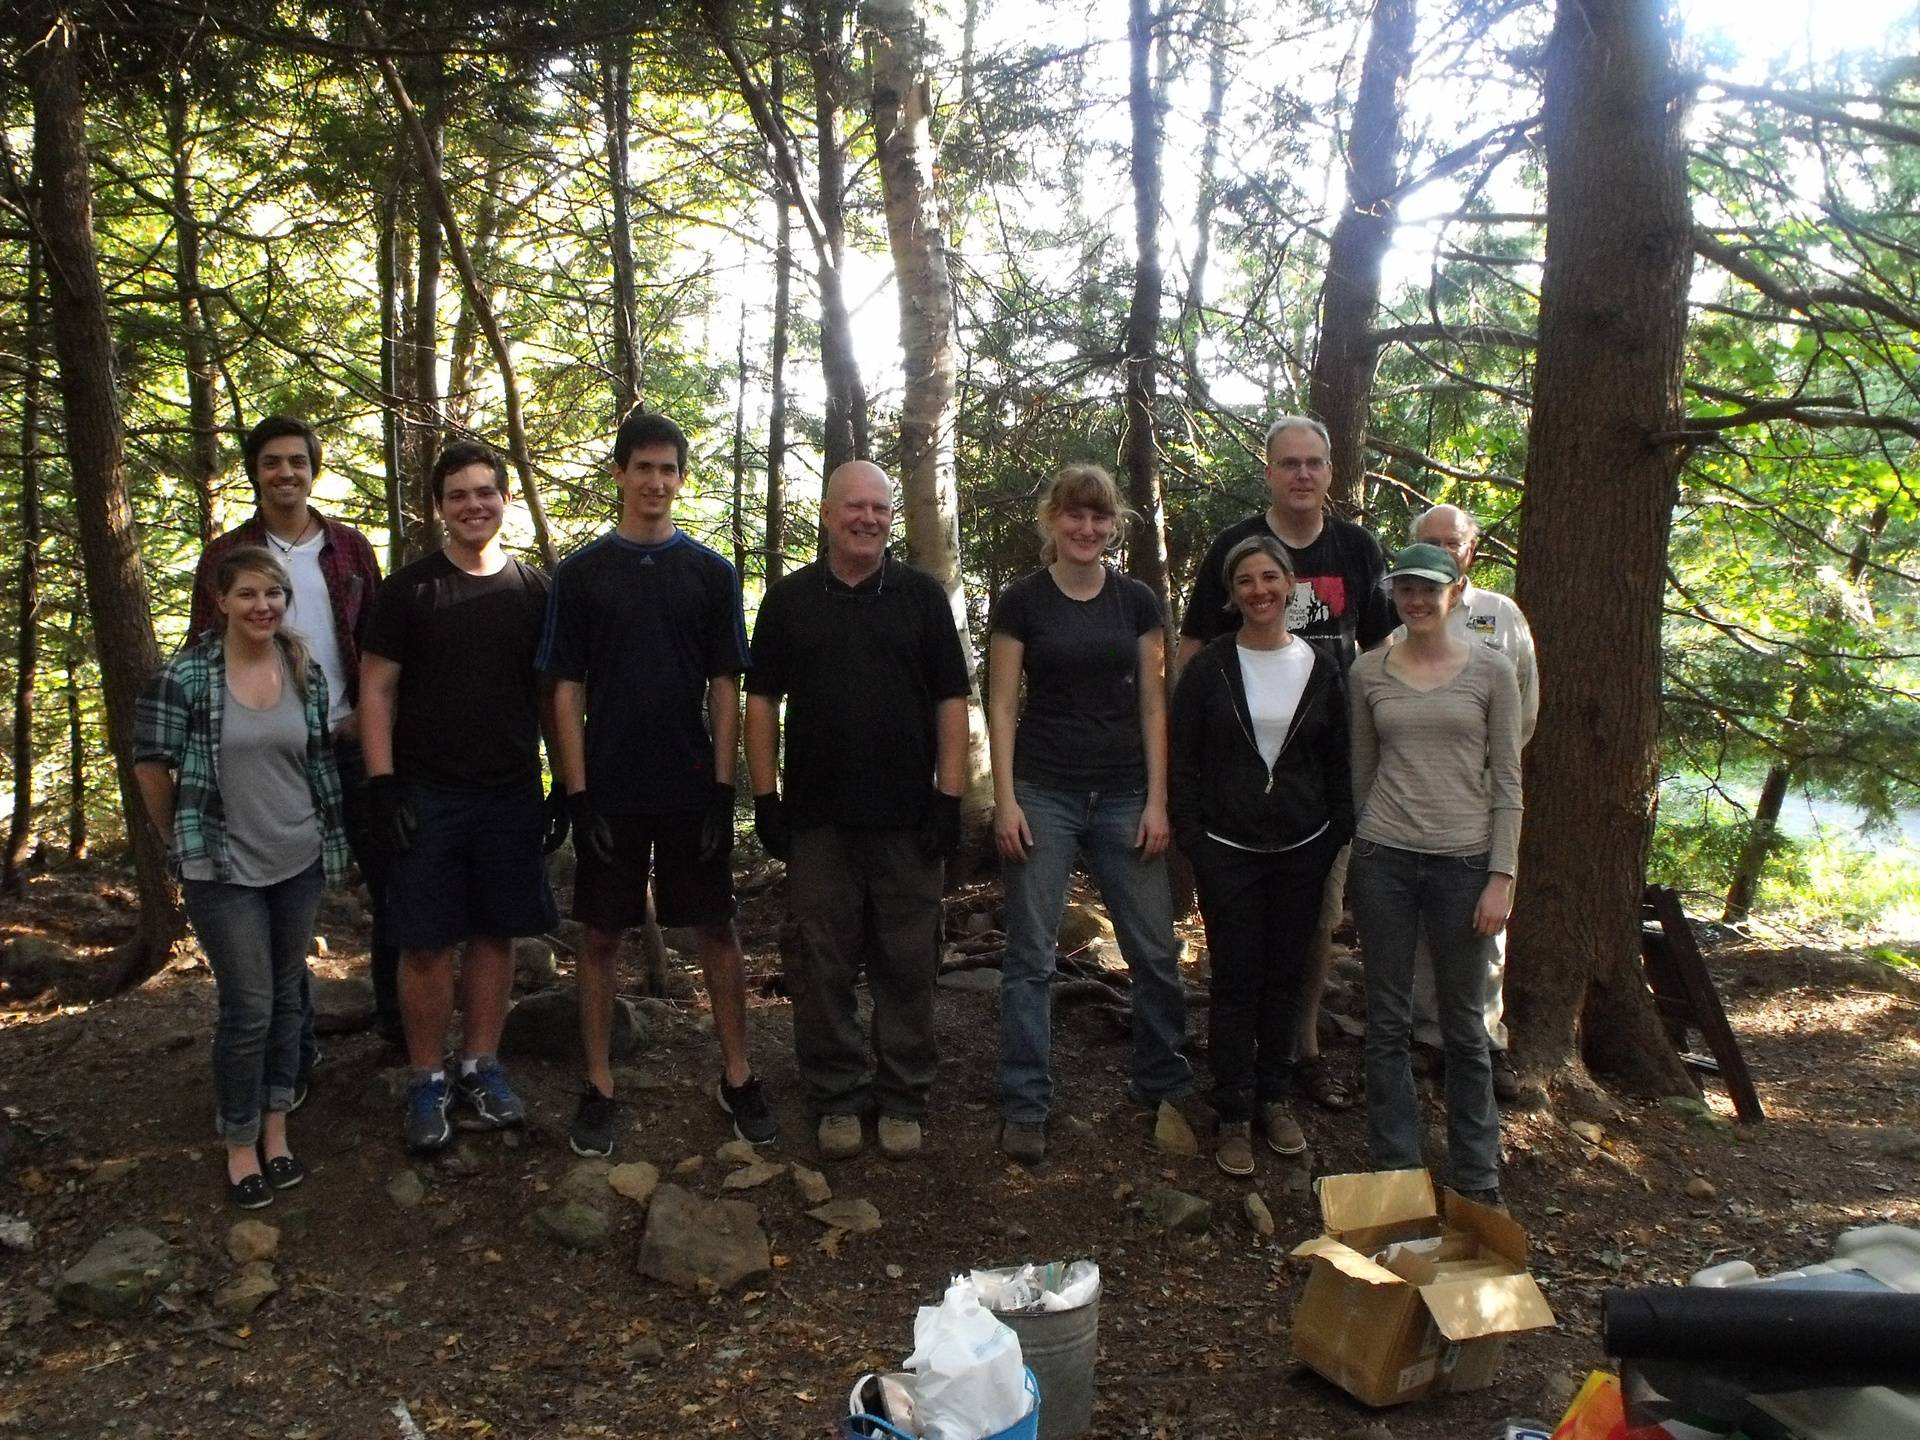 Our afternoon dig crew, minus a few early departures.